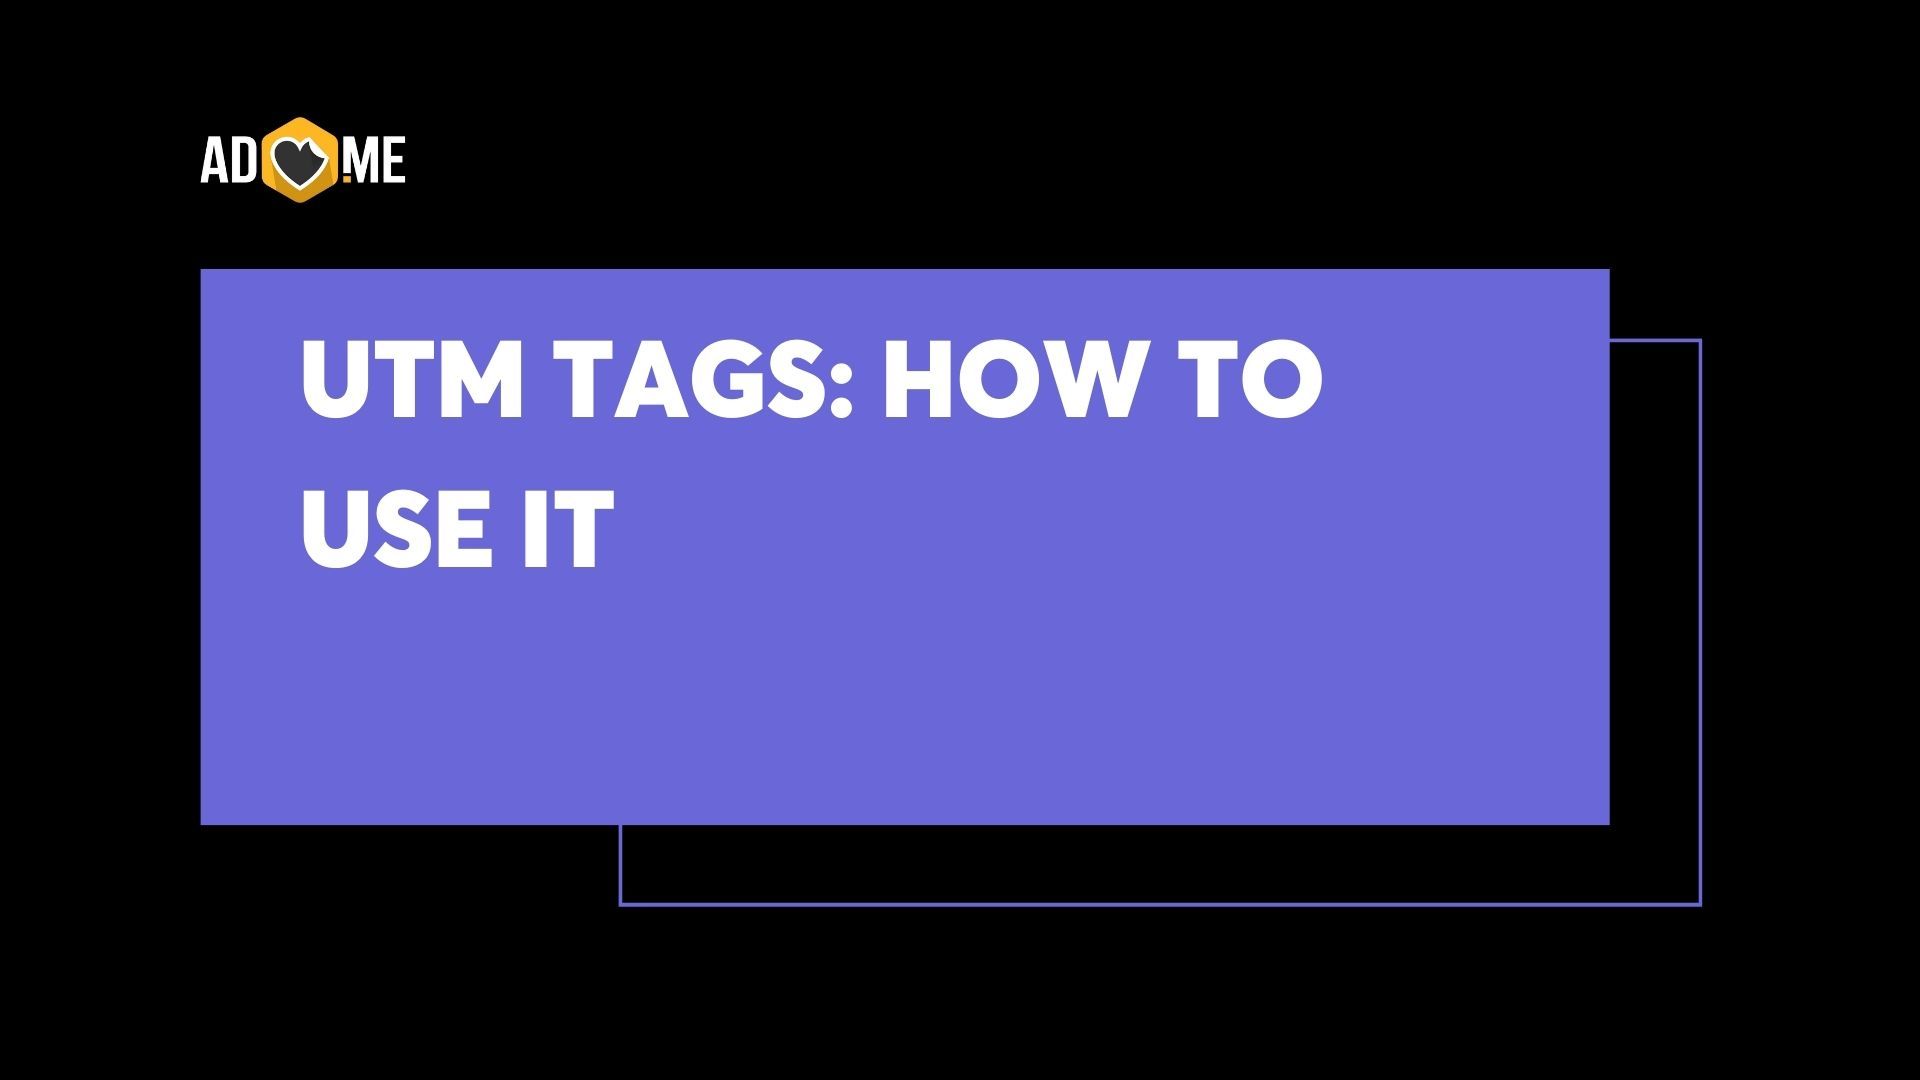 UTM tags: how to use it